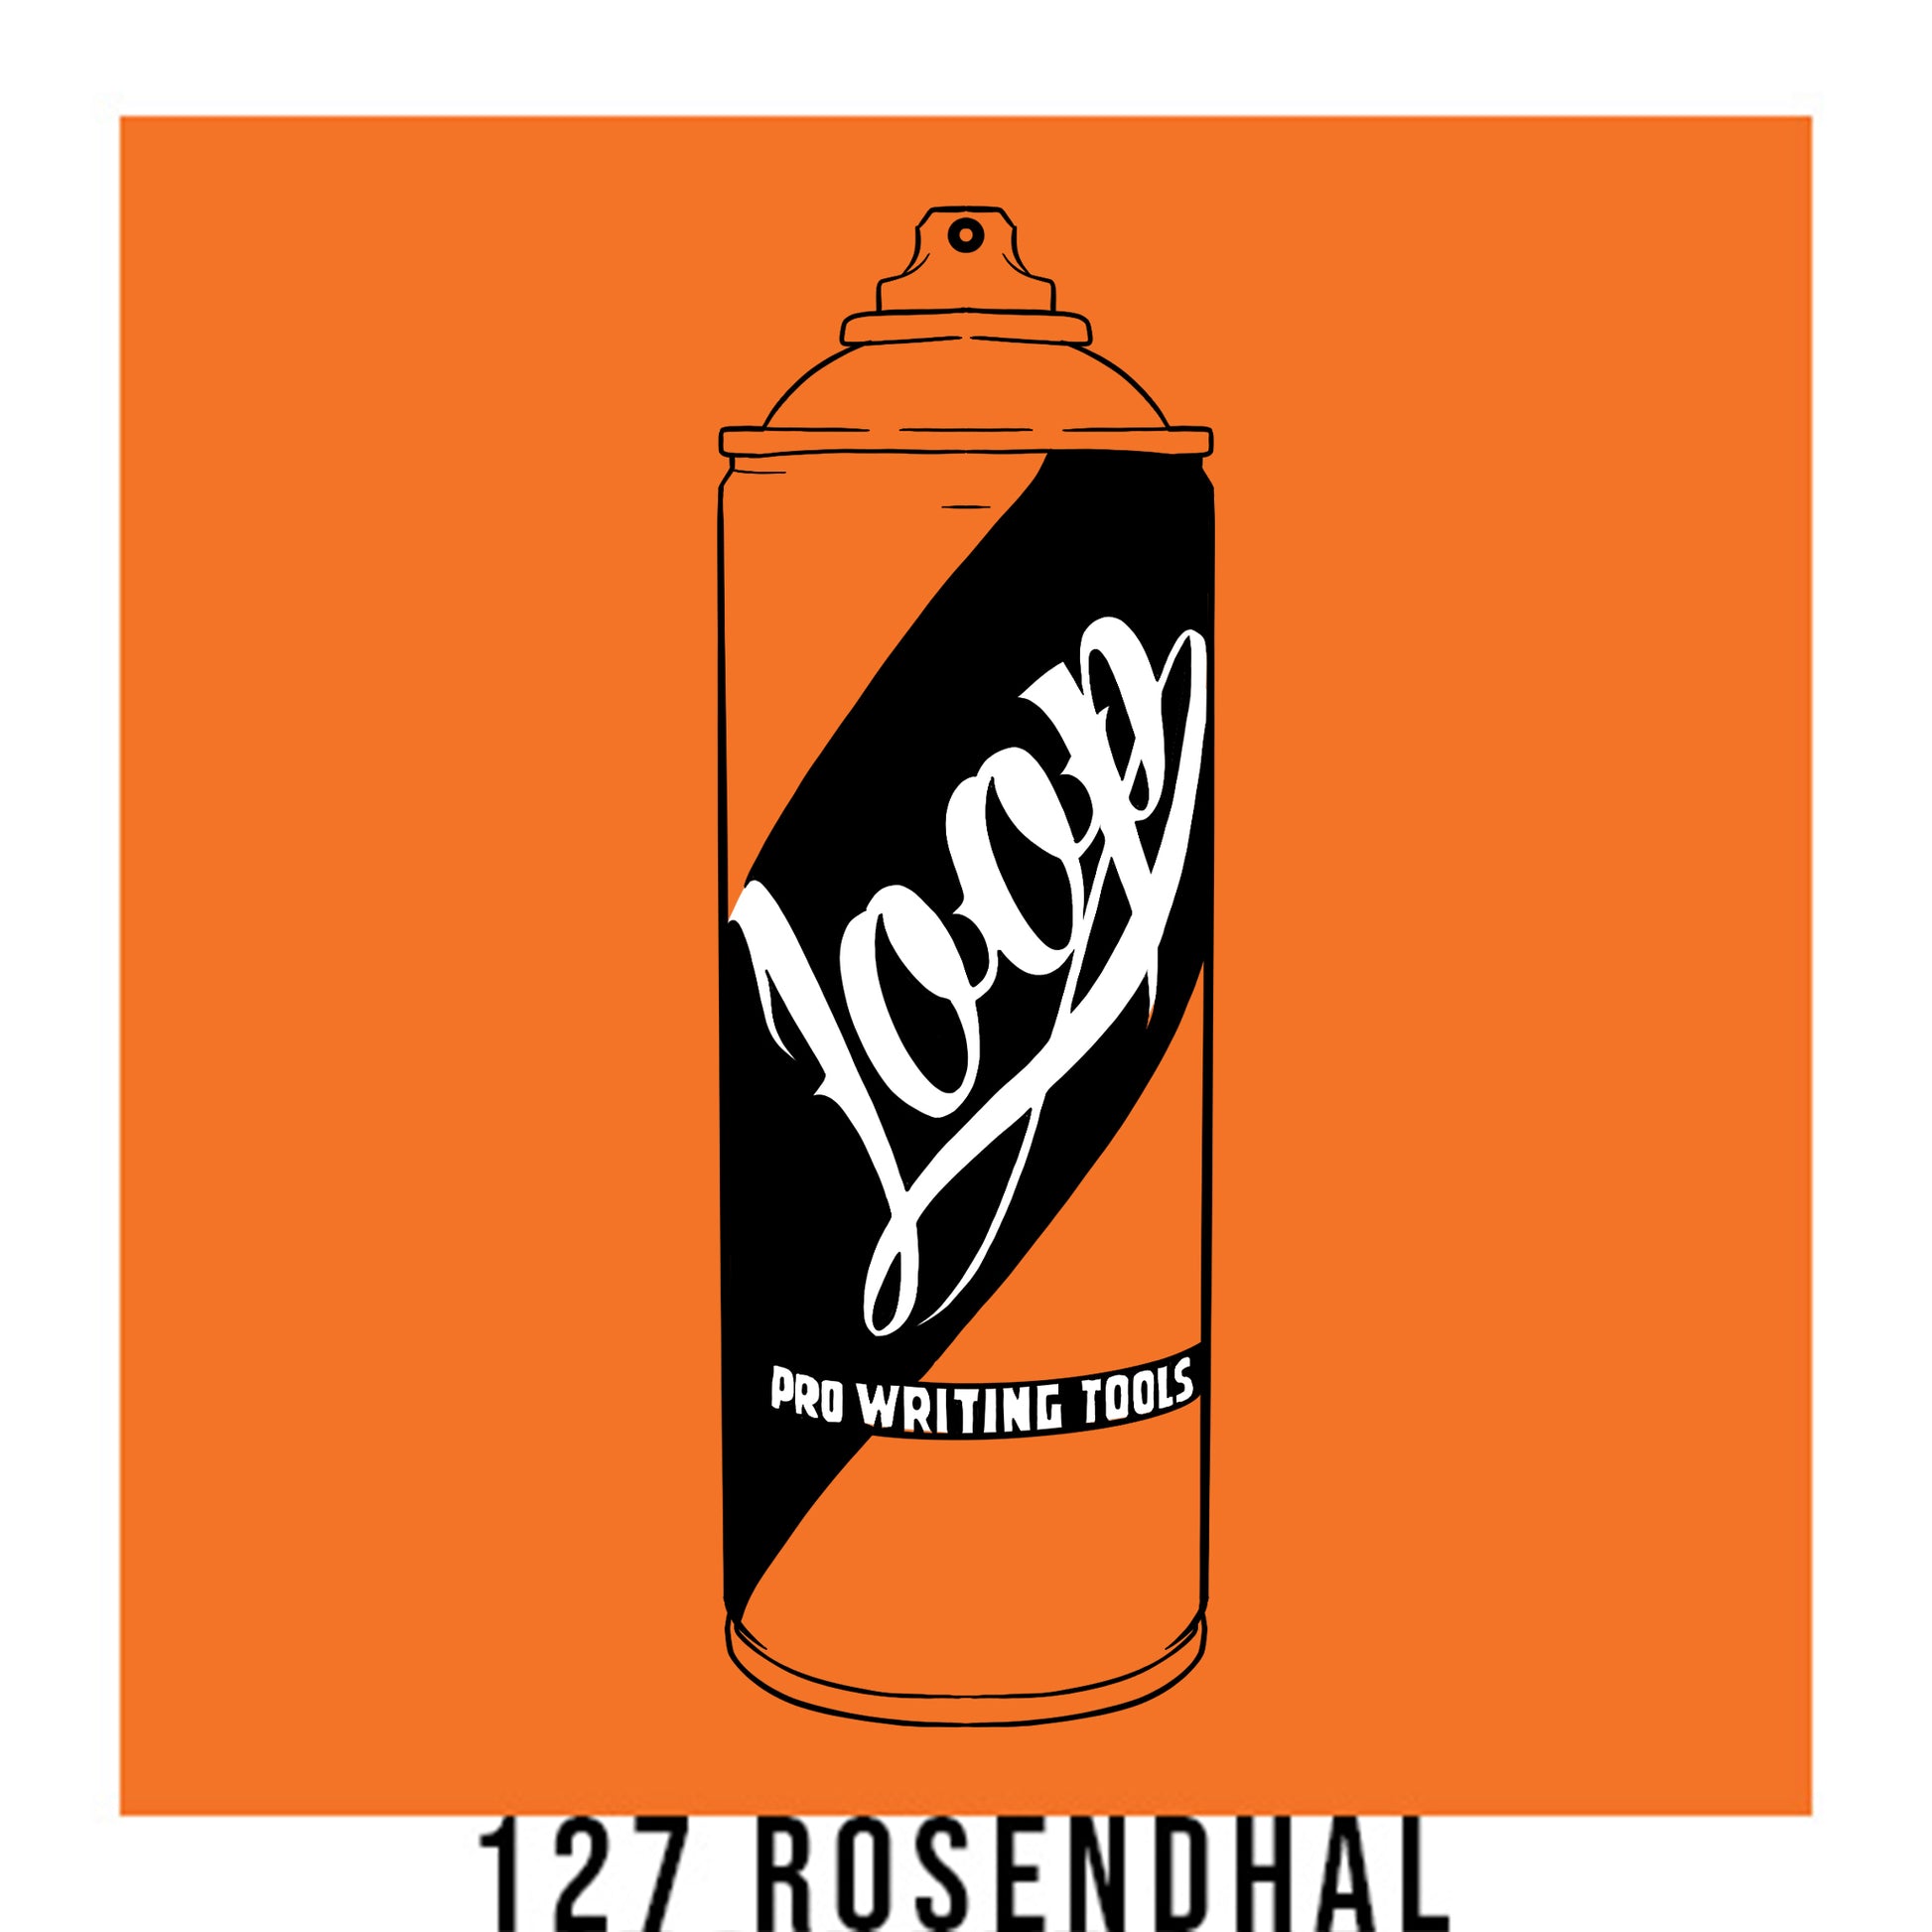 A black outline drawing of a  orange spray paint can with the word "Loop" written on the face in script. The background is a color swatch of the same  orange with a white border with the words "127 roesndhal" at the bottom.